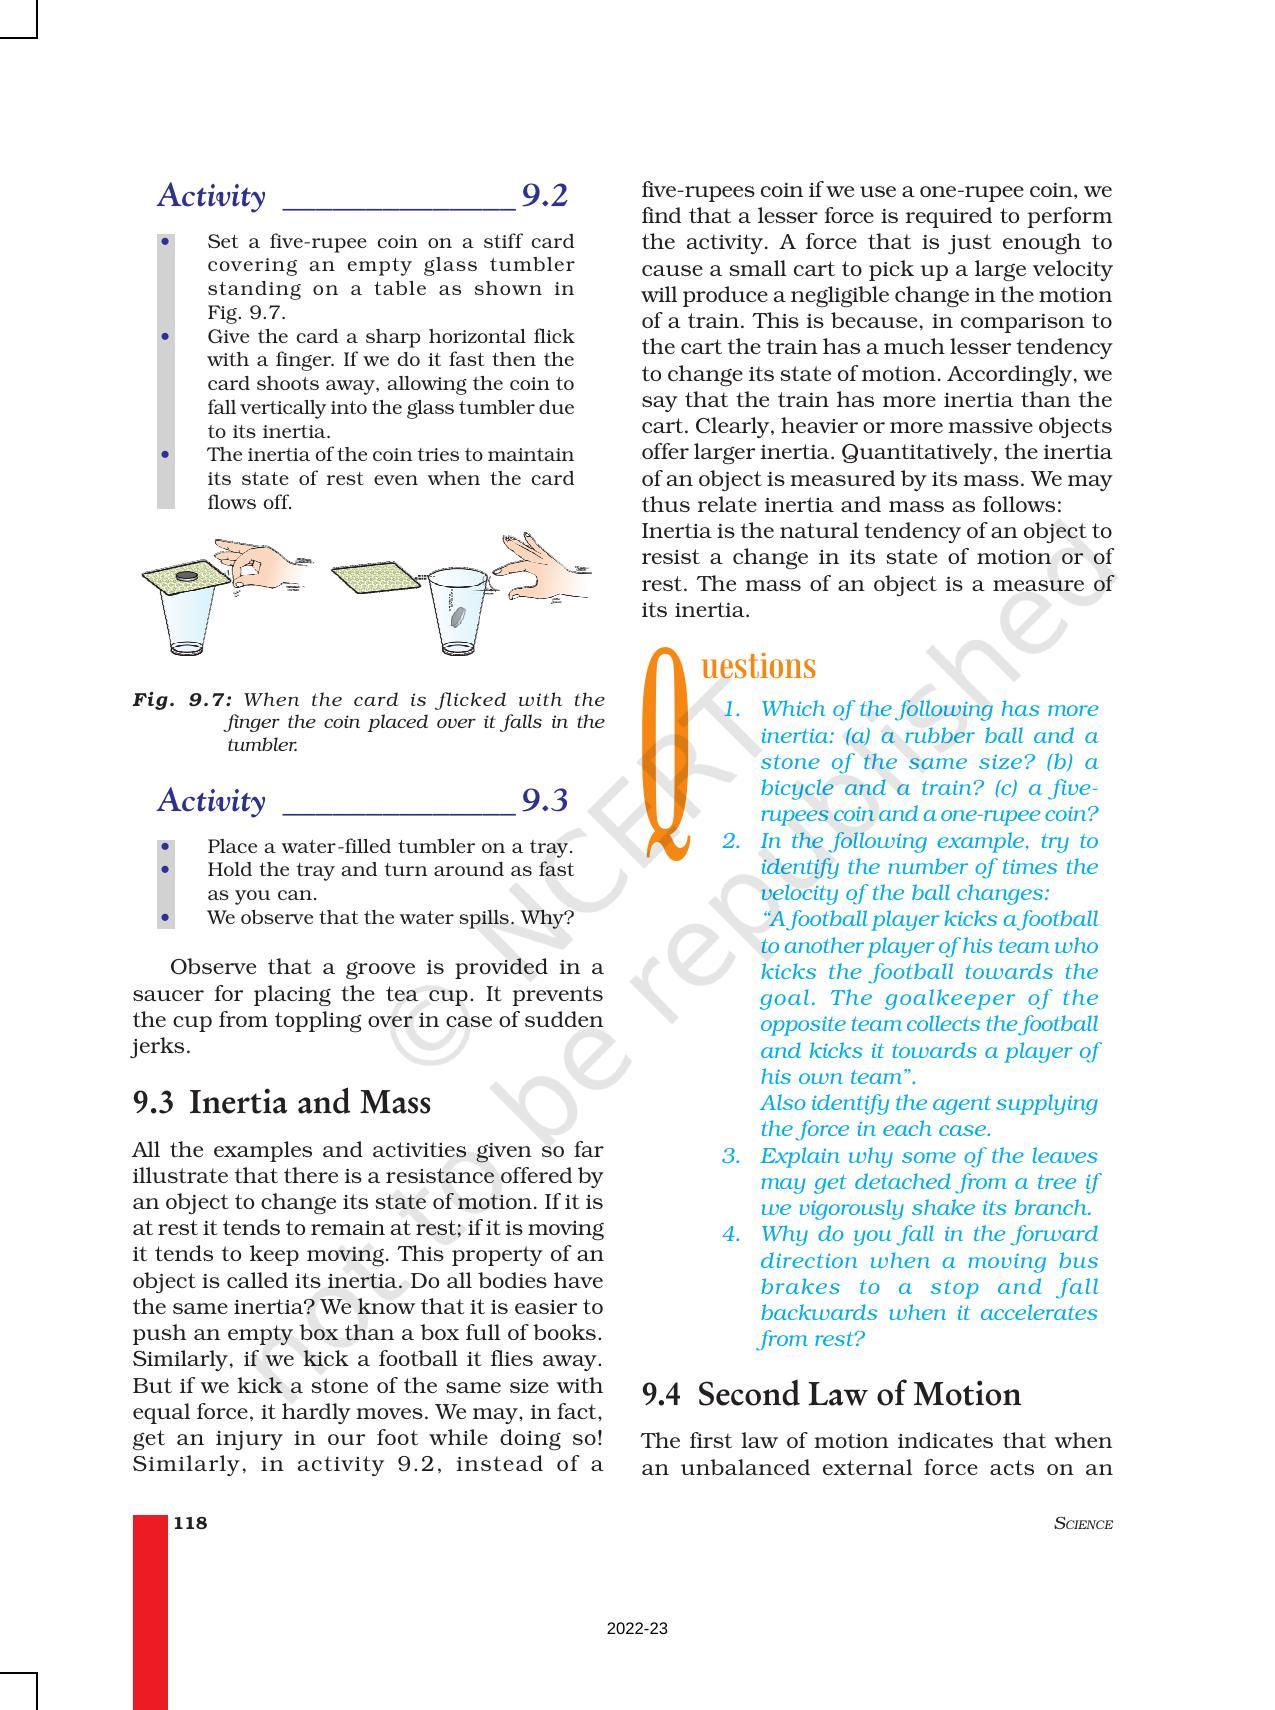 NCERT Book for Class 9 Science Chapter 9 Force And Laws Of Motion - Page 5